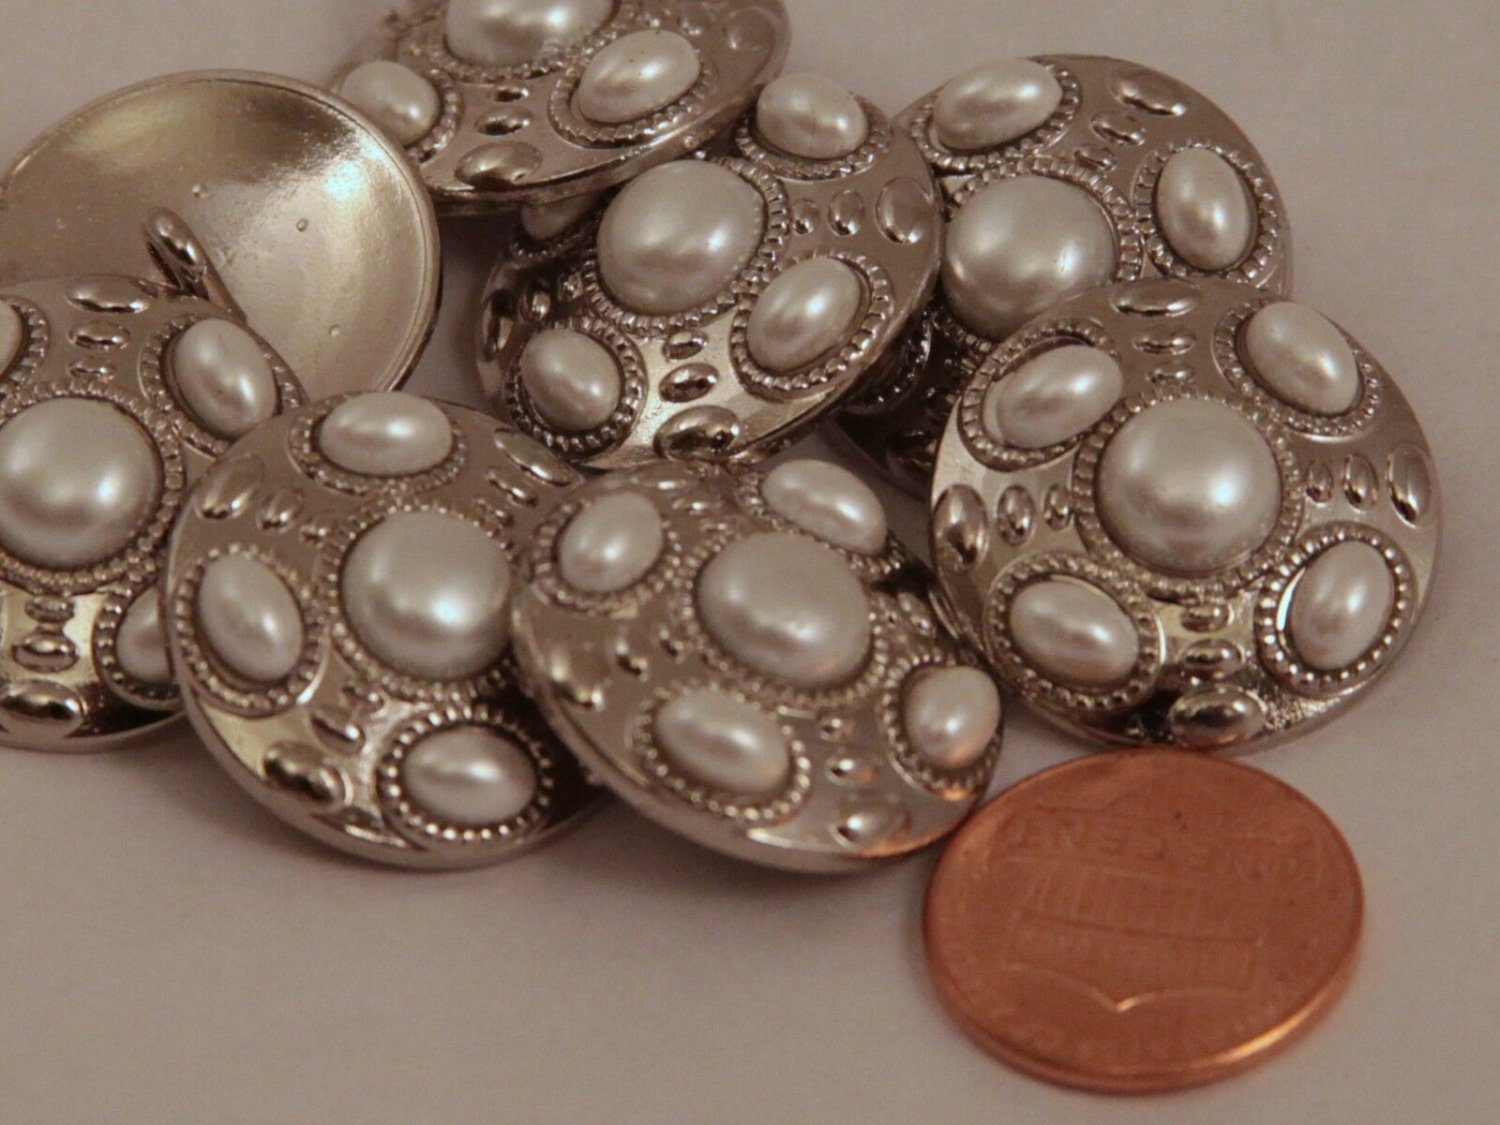 8 Shiny Silver Tone Domed Metal Buttons Faux Pearl Cabochons 7/8" 23MM # 6027